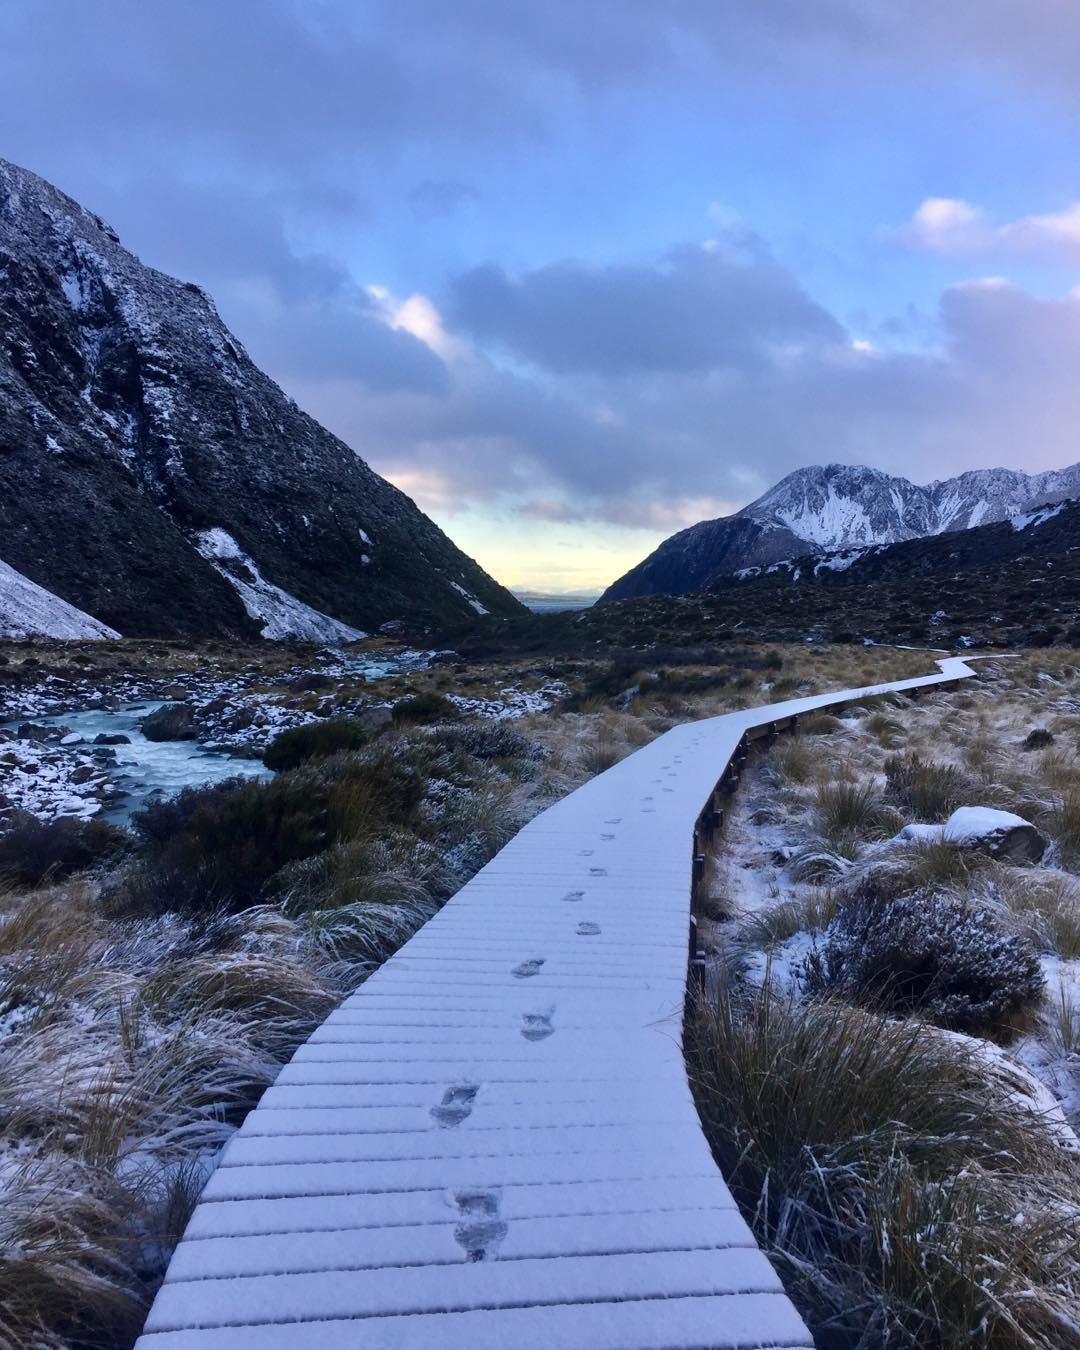 Aoraki/ Mount Cook National Park, New Zealand 🇳🇿.
.
When you're the first one to hike on the fresh snow in the morning.
.
#travel #newzealand #mountcook #aoraki #instatravel #backpacking #hike #hookervalley #hookervalleytrack #nationalpark #snow #footprints #traveller #hiking #freshsnow #travelling #southisland #purenewzealand